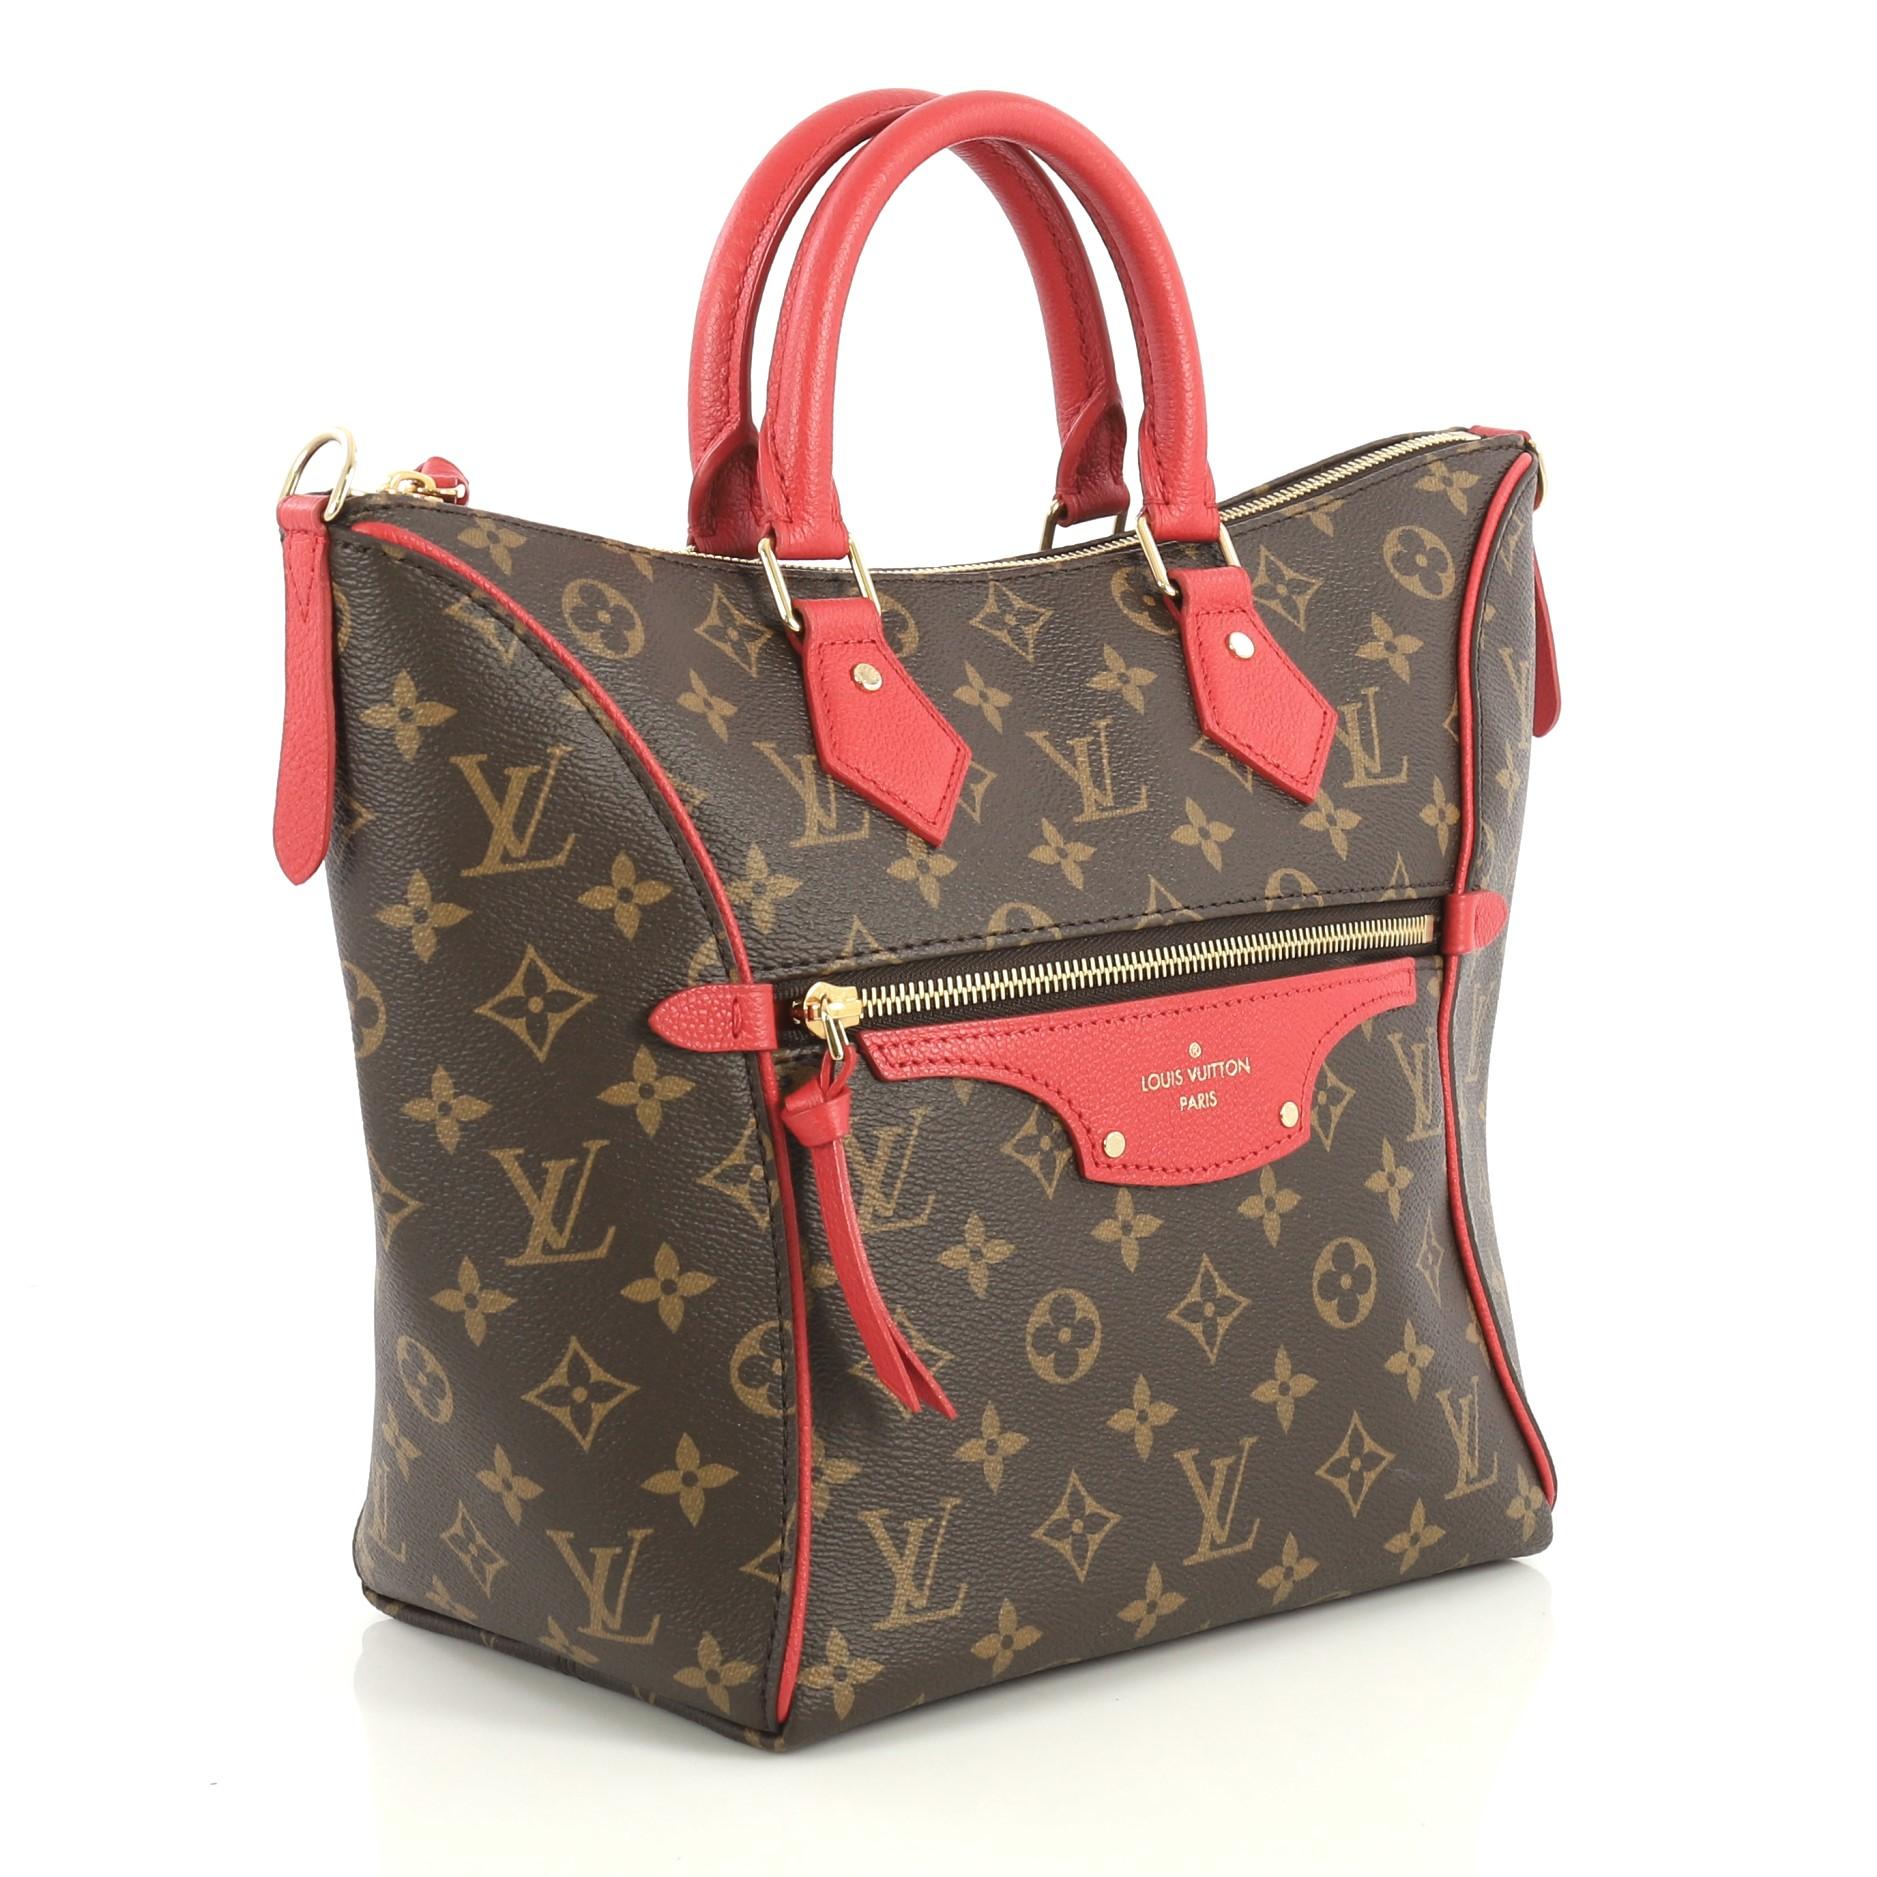 This Louis Vuitton Tournelle Tote Monogram Canvas PM, crafted in brown monogram coated canvas, features dual rolled leather handles, leather trim, exterior zip pocket, and gold-tone hardware. Its zip closure opens to a red fabric interior with slip